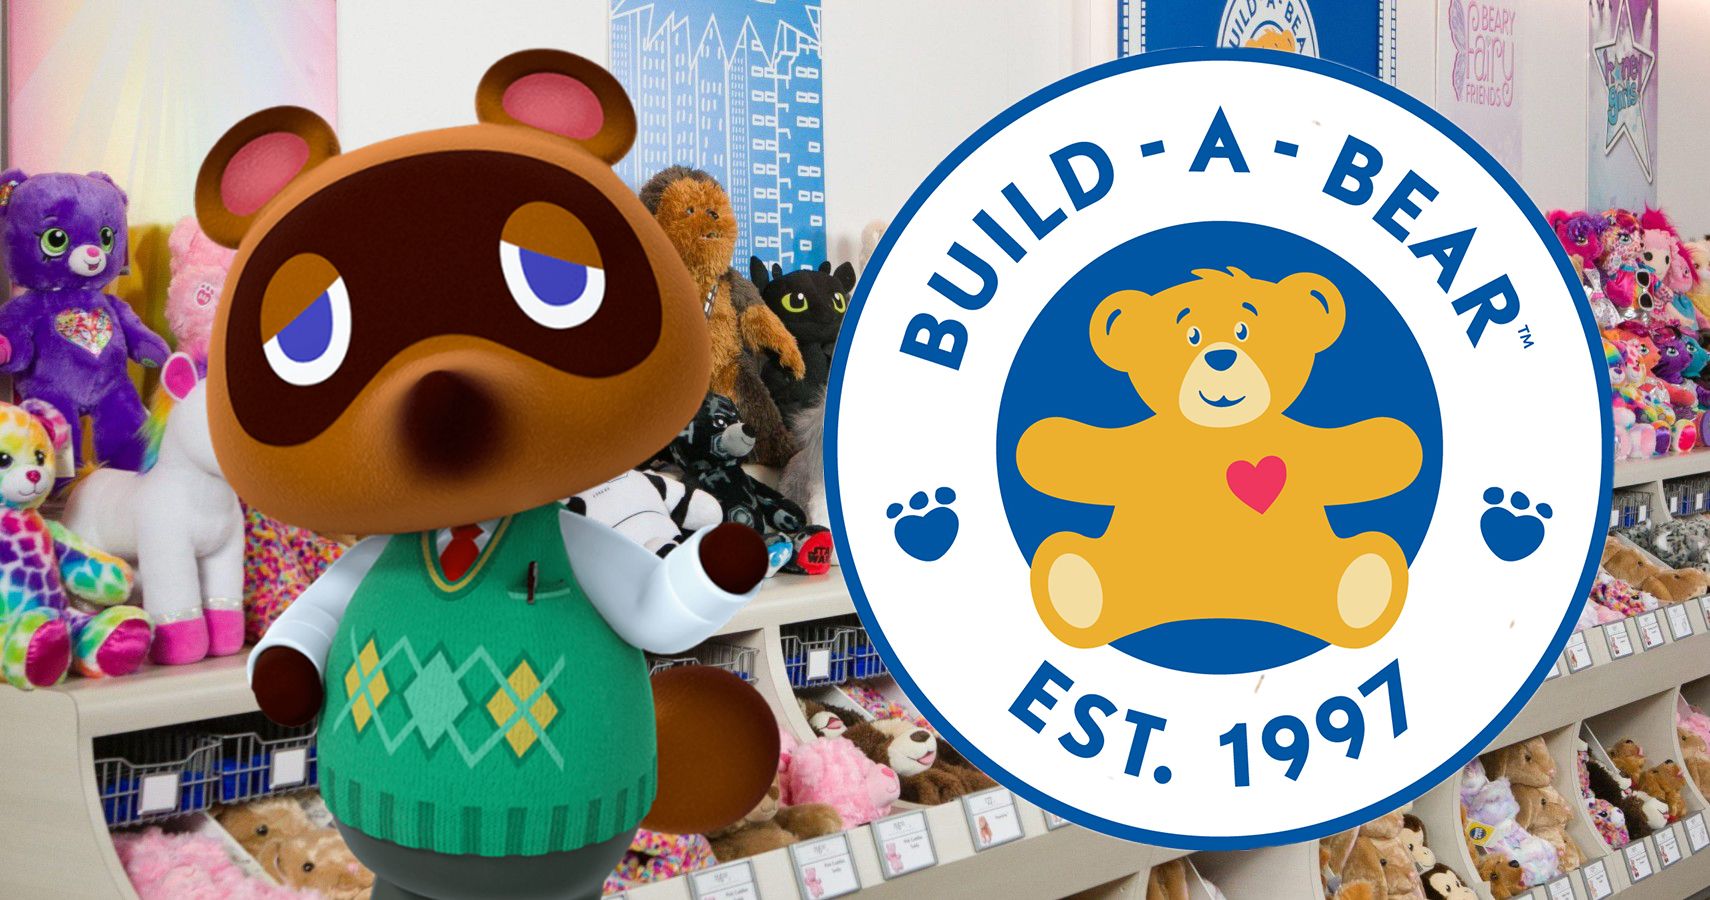 Build-A-Bear Workshop Tweet Sparks Speculation for Kirby Collaboration